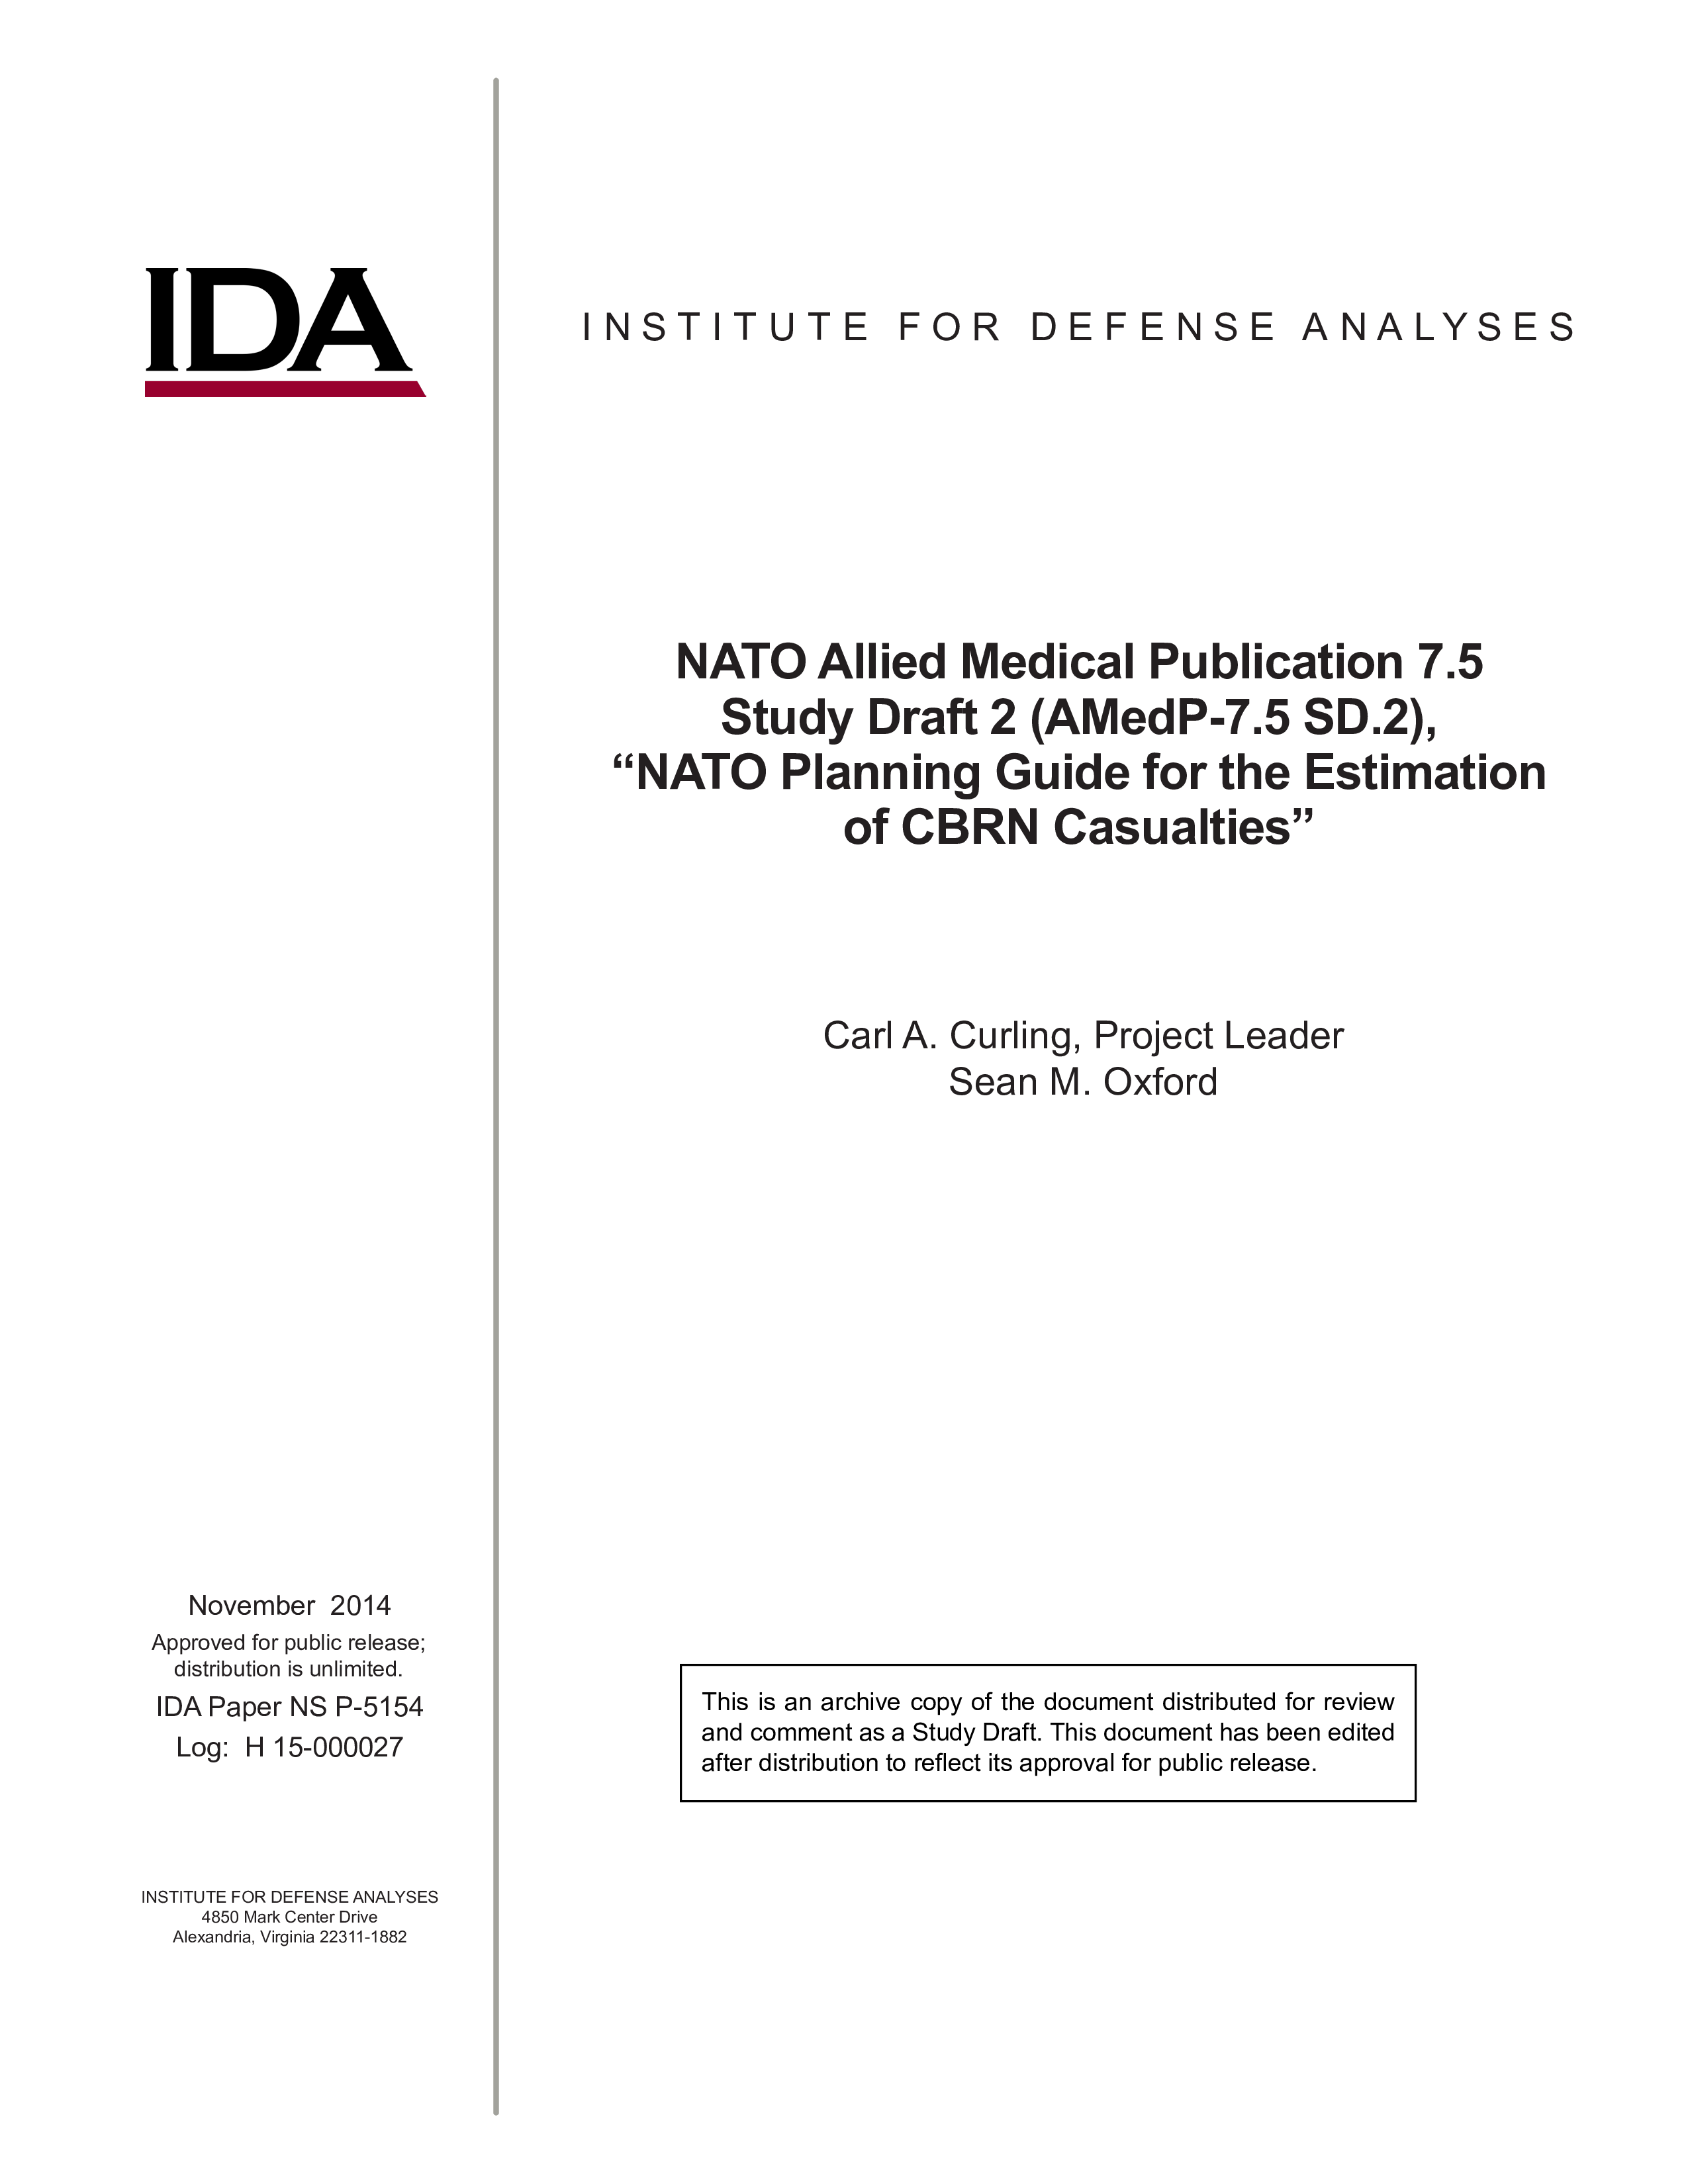 NATO Allied Medical Publication 7.5 Study Draft 2 (AMedP-7.5 SD.2), “NATO Planning Guide for the Estimation of CBRN Casualties”